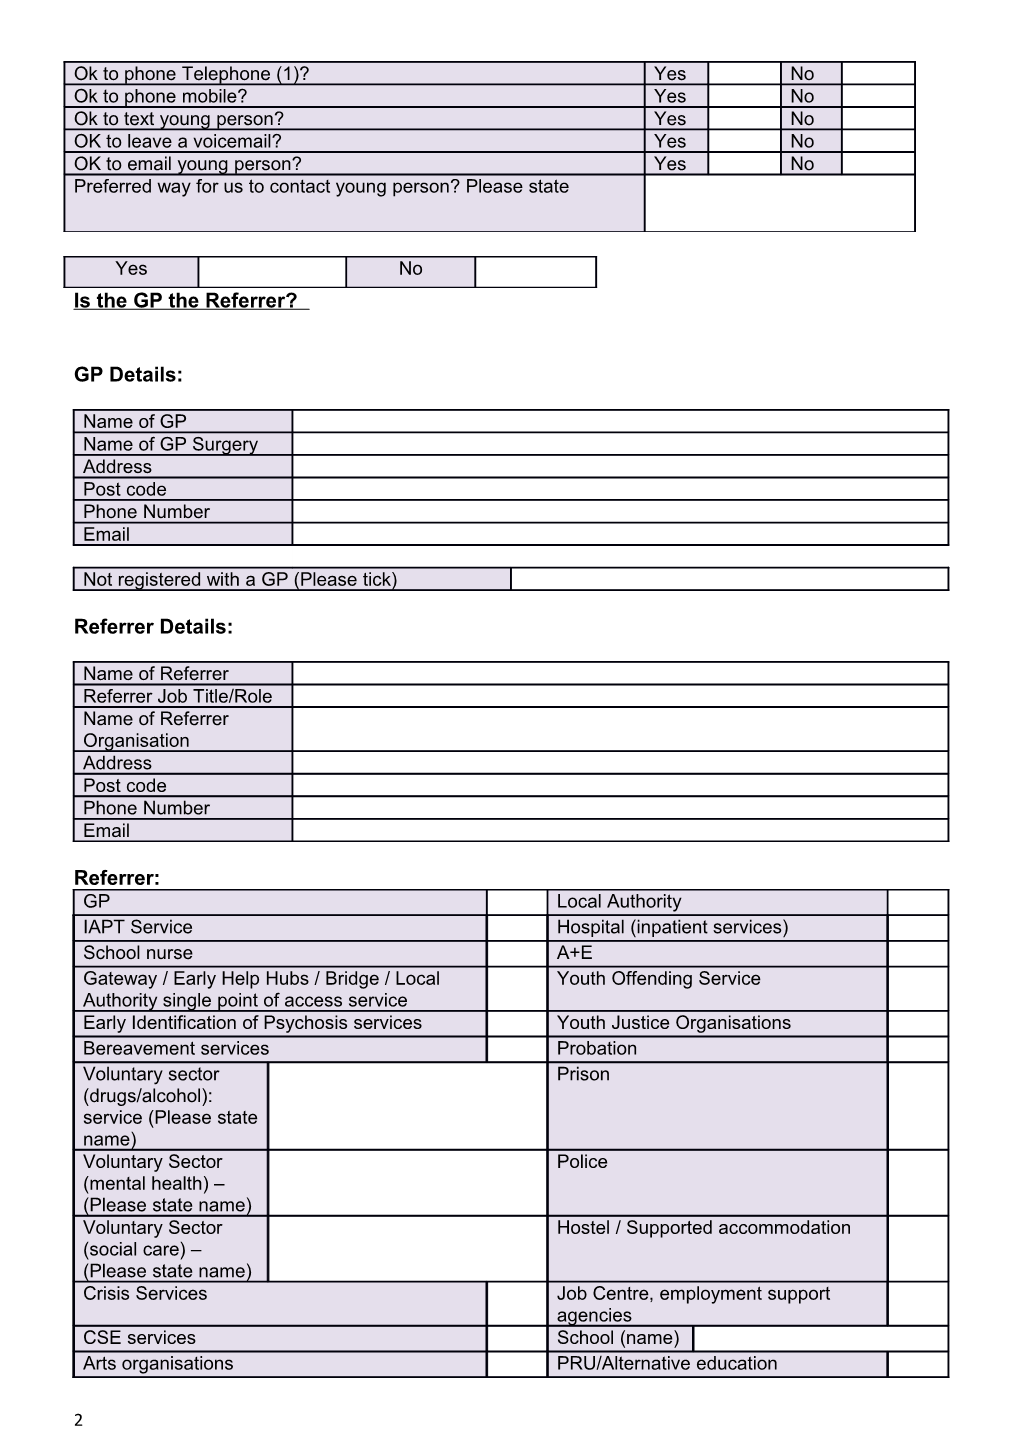 42Nd Street Referral Form 2016 - for Professionals